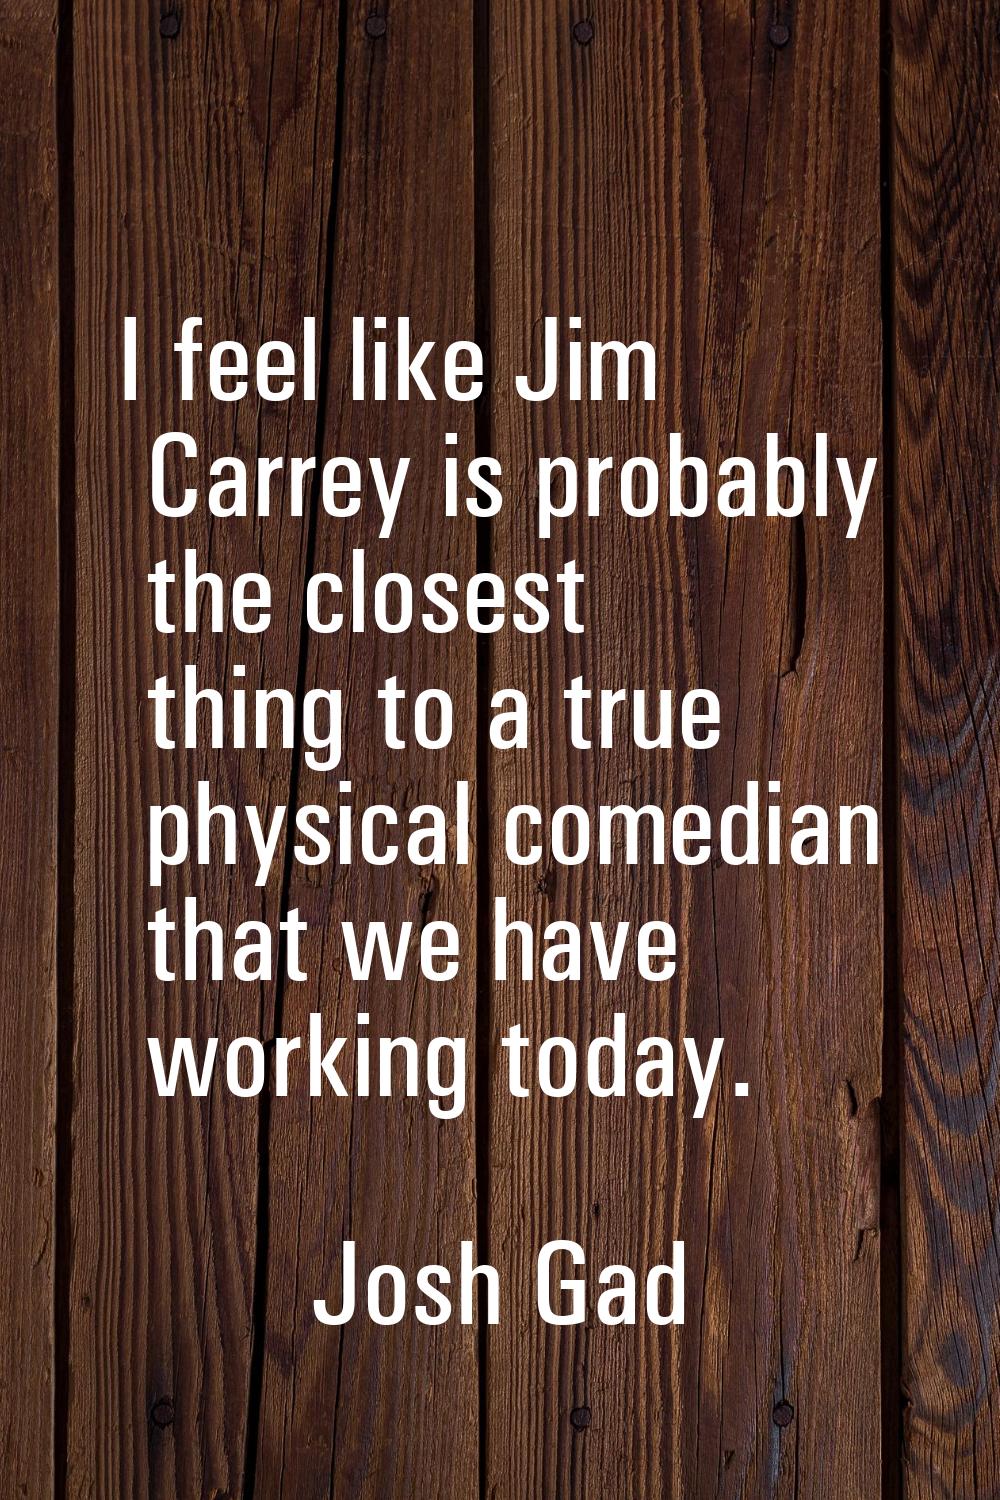 I feel like Jim Carrey is probably the closest thing to a true physical comedian that we have worki